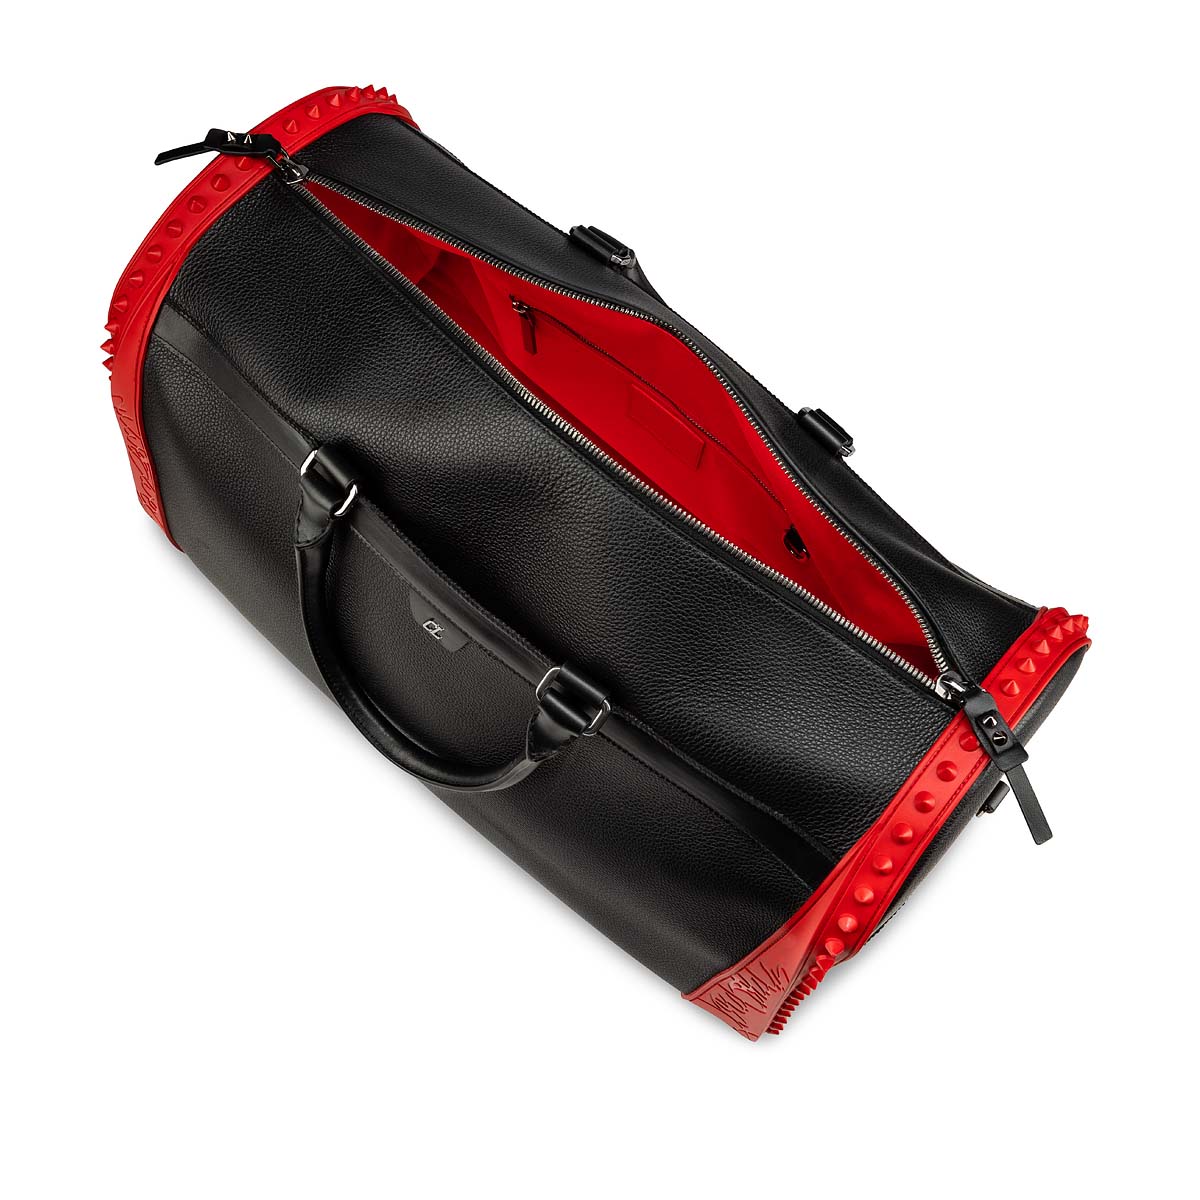 Sneakender - Travel bag - Calf leather and rubber - Black